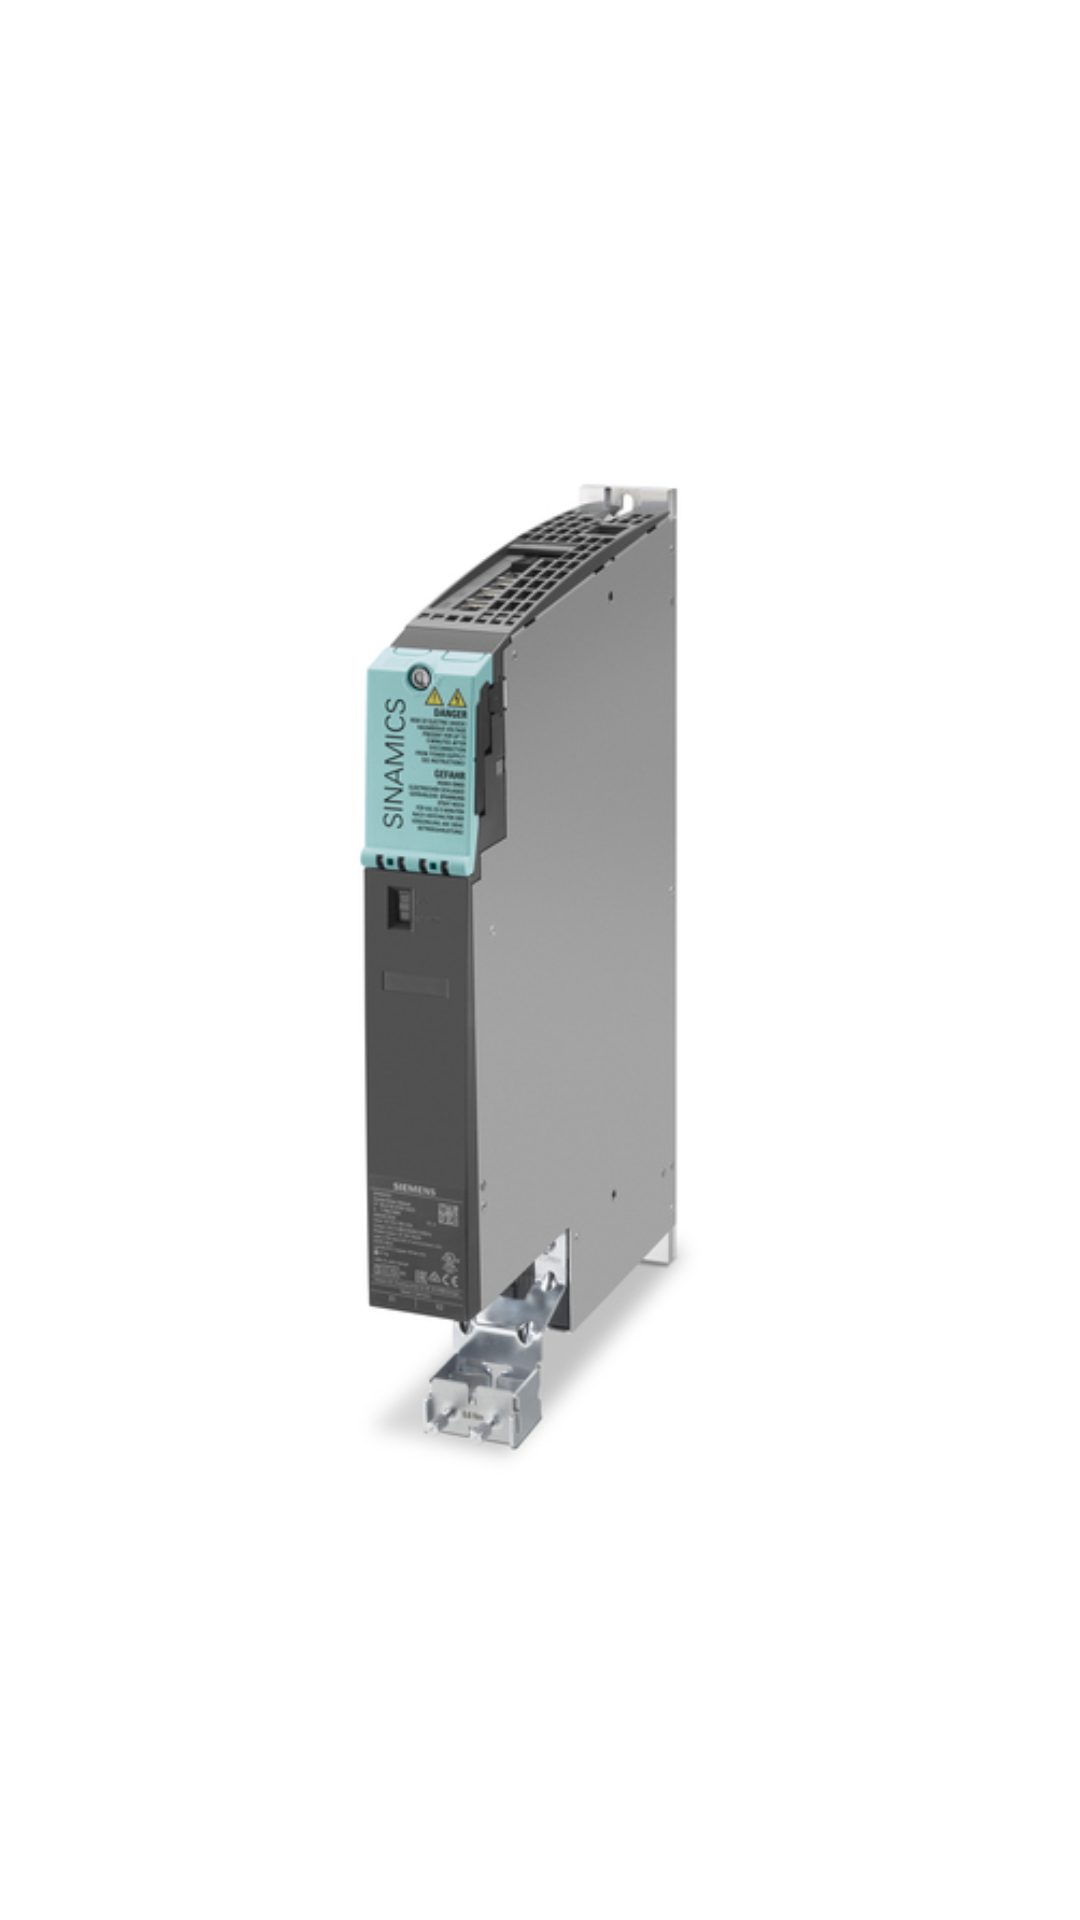 6SL3120-2TE13-0AD0 Siemens SINAMICS S120 DOUBLE MOTOR MODULE INPUT: DC 600V OUTPUT: 3AC 400V, 3A/3A FRAME SIZE: BOOKSIZE D-TYPE INTERNAL AIR COOLING OPTIMIZED PULSE SAMPLE AND SUPPORT OF THE EXTENDED SAFETY INTEGRATED FUNCTIONS INCL. DRIVE-CLIQ CABLE